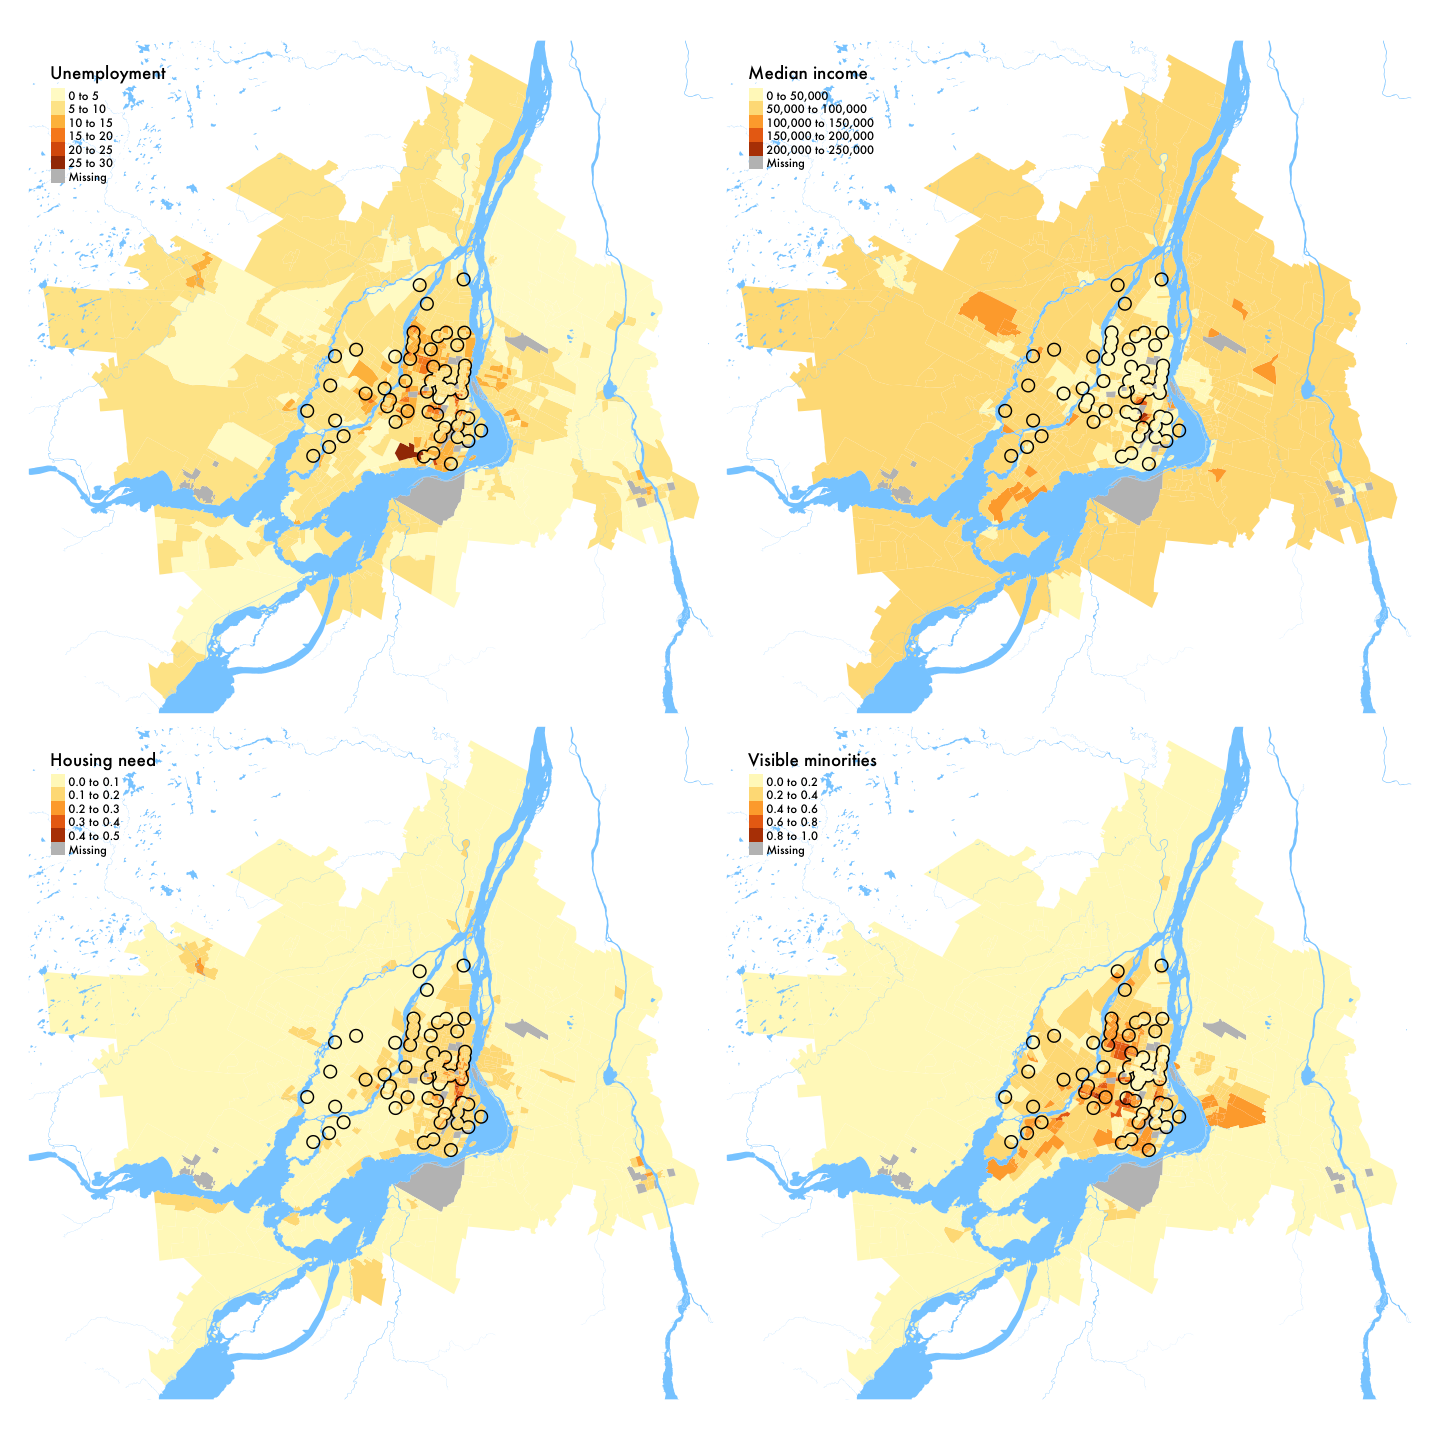 Demographic variables in Montreal (region), 2016